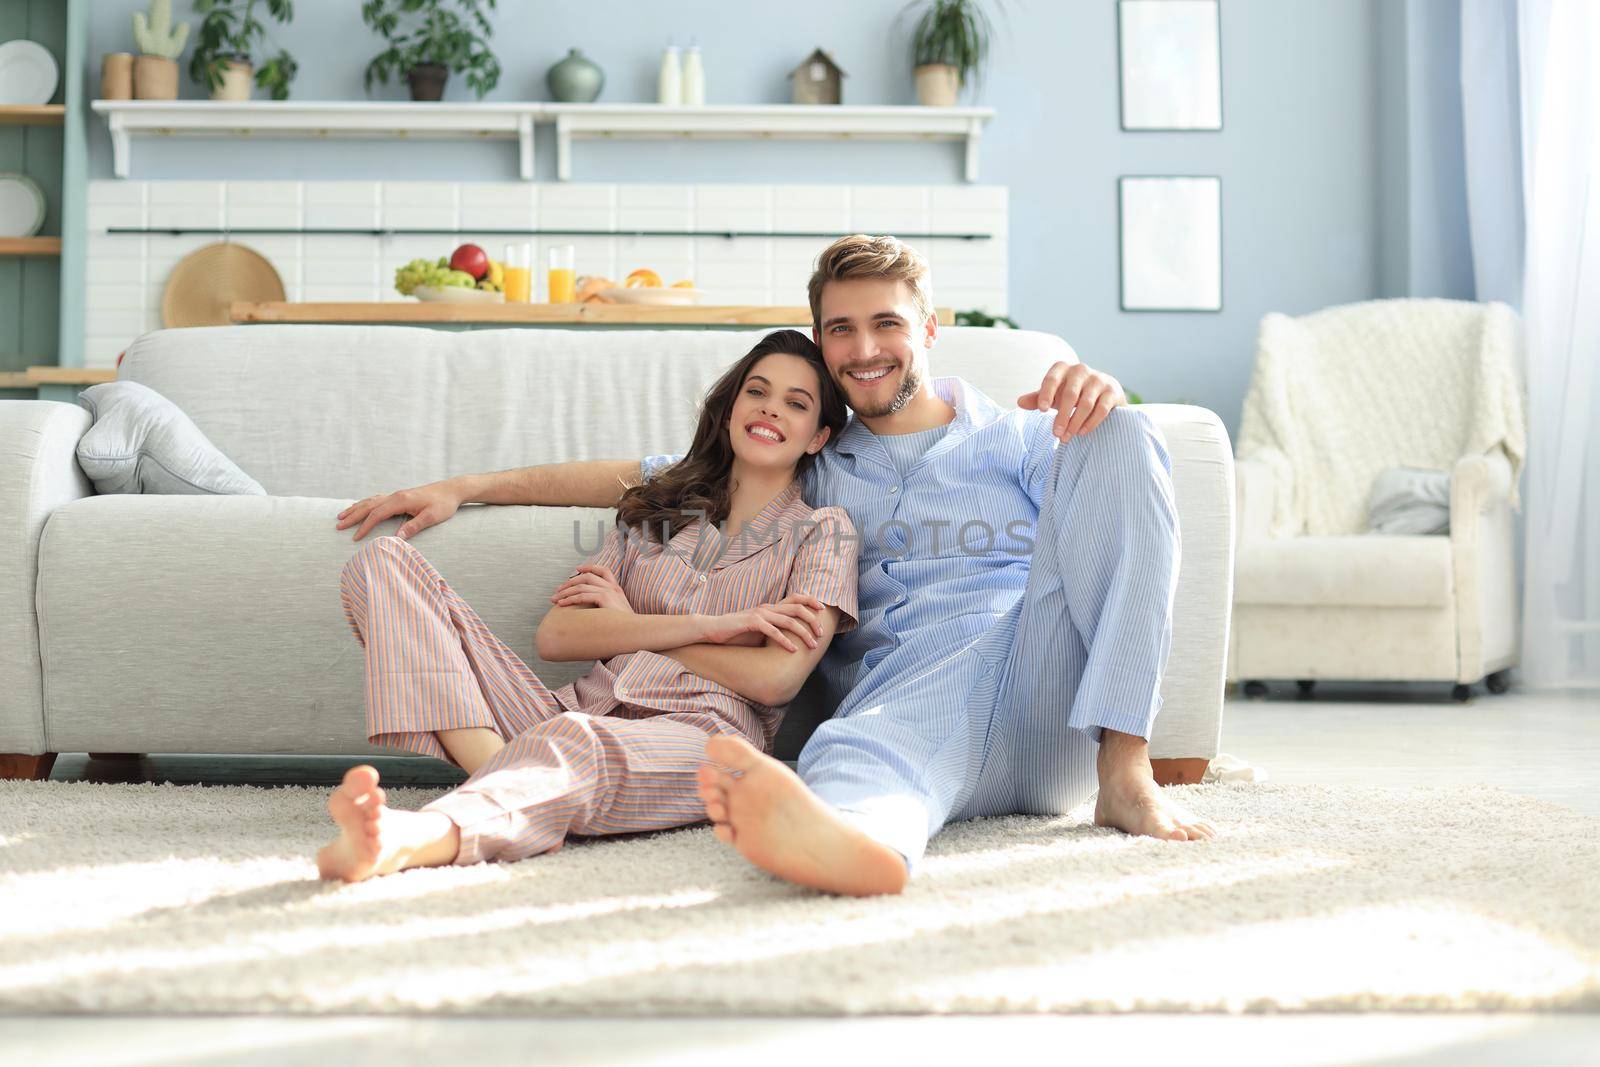 The happy couple in pajamas sitting on the floor background of the sofa in the living room. by tsyhun